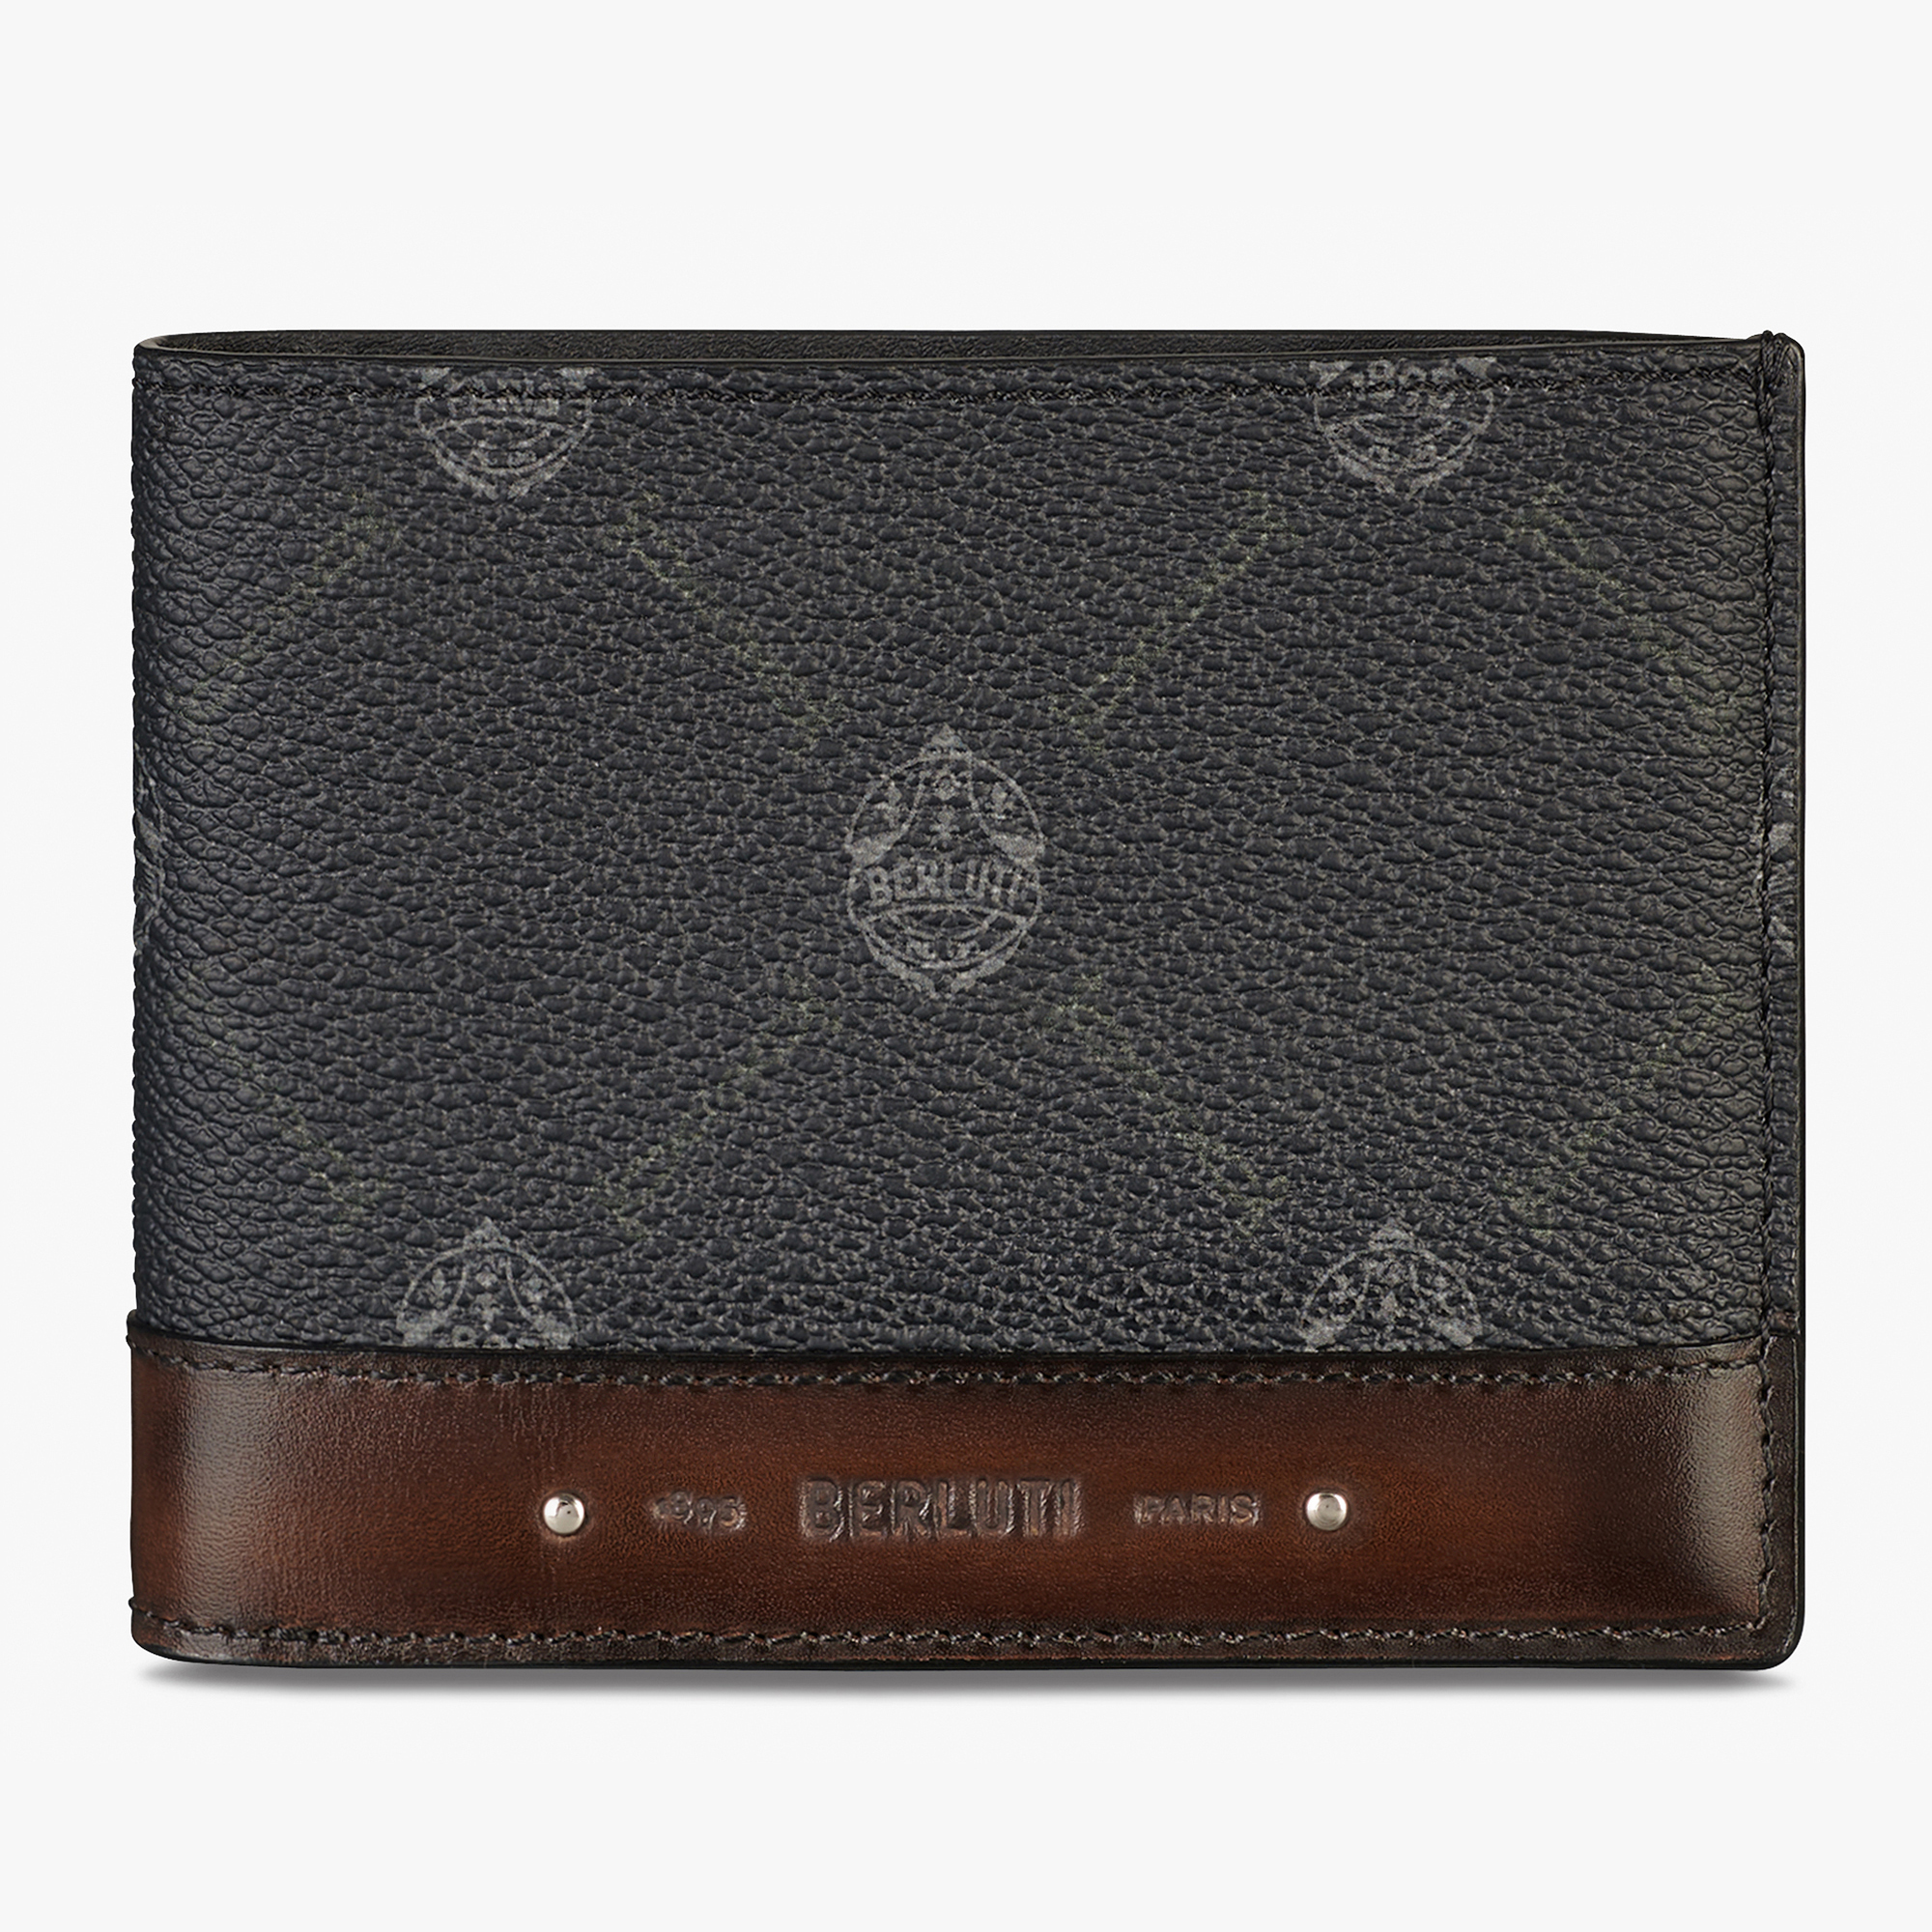 Excursion Canvas And Leather Wallet, BLACK + TDM INTENSO, hi-res